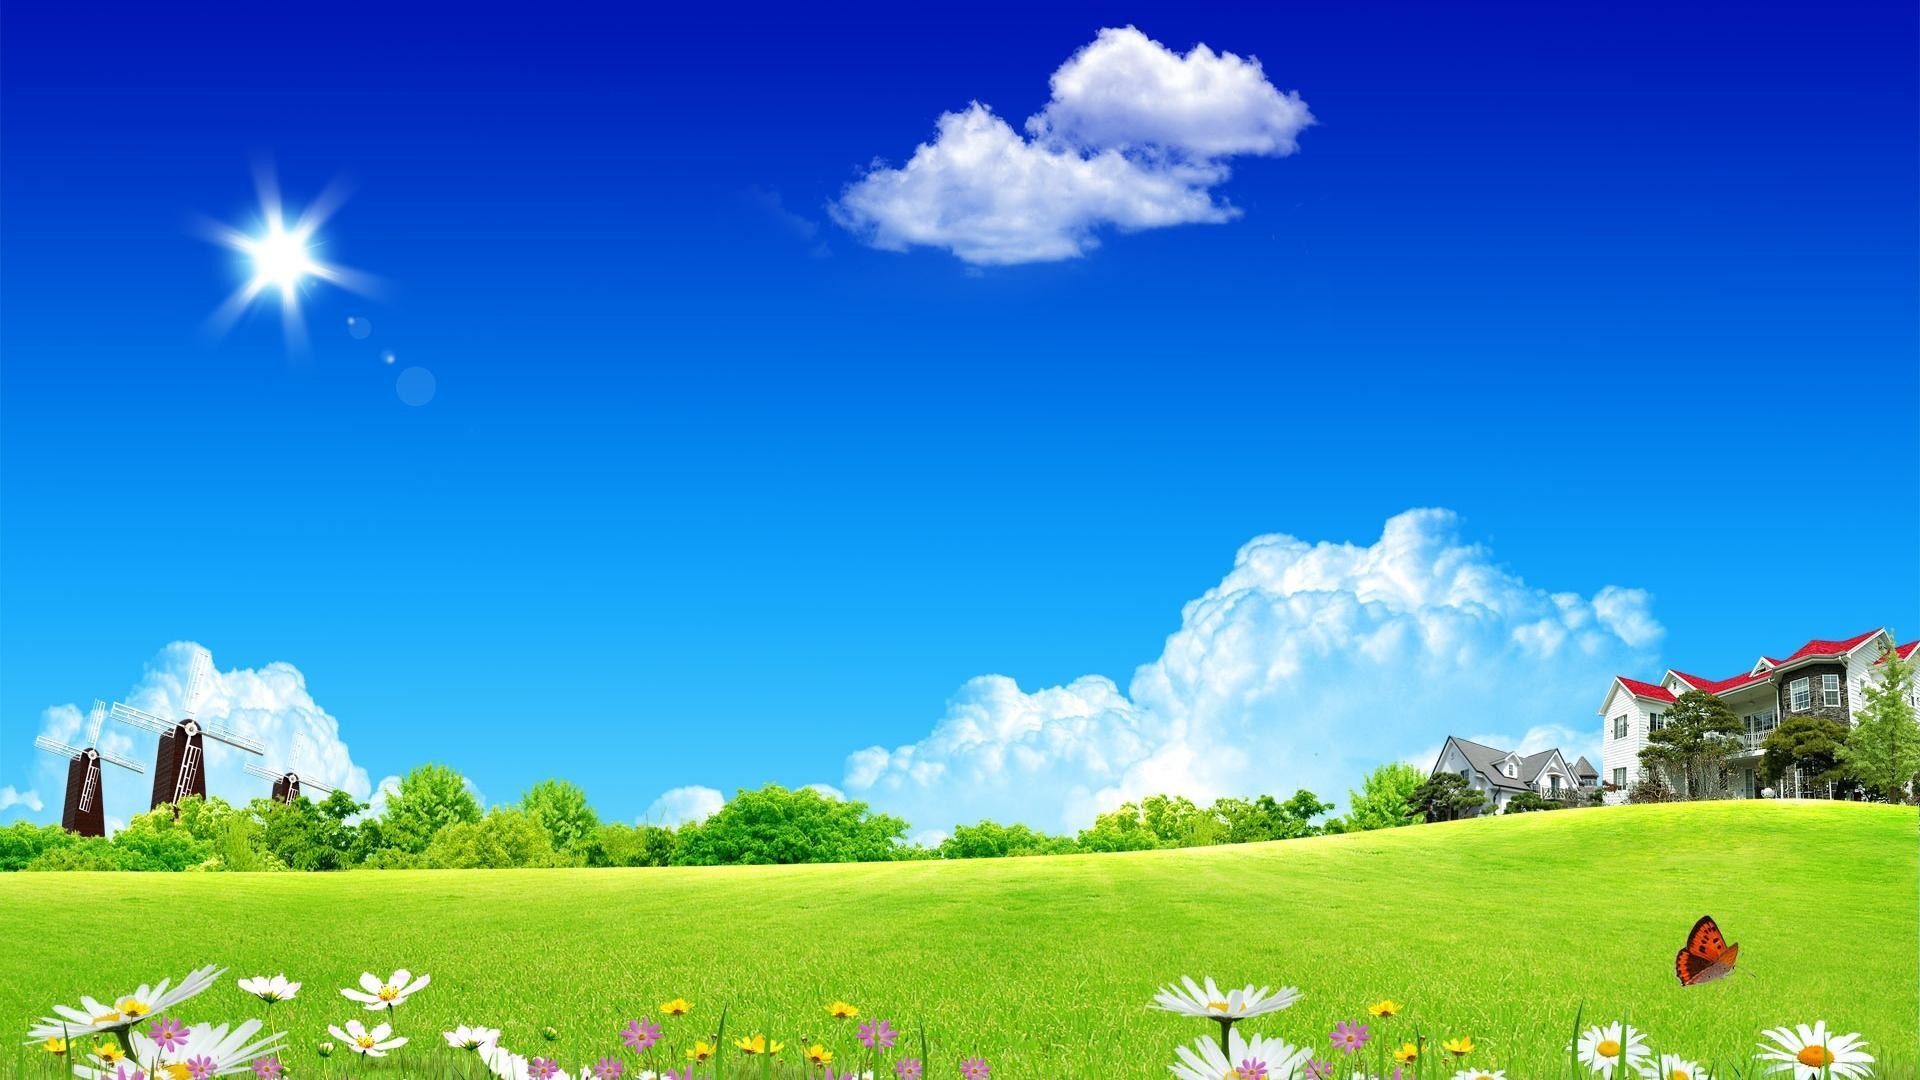 1920x1080 Scenery Background Images Lovely Dream Garden Of Summer Scenery Desktop  Backgrounds Widescreen and